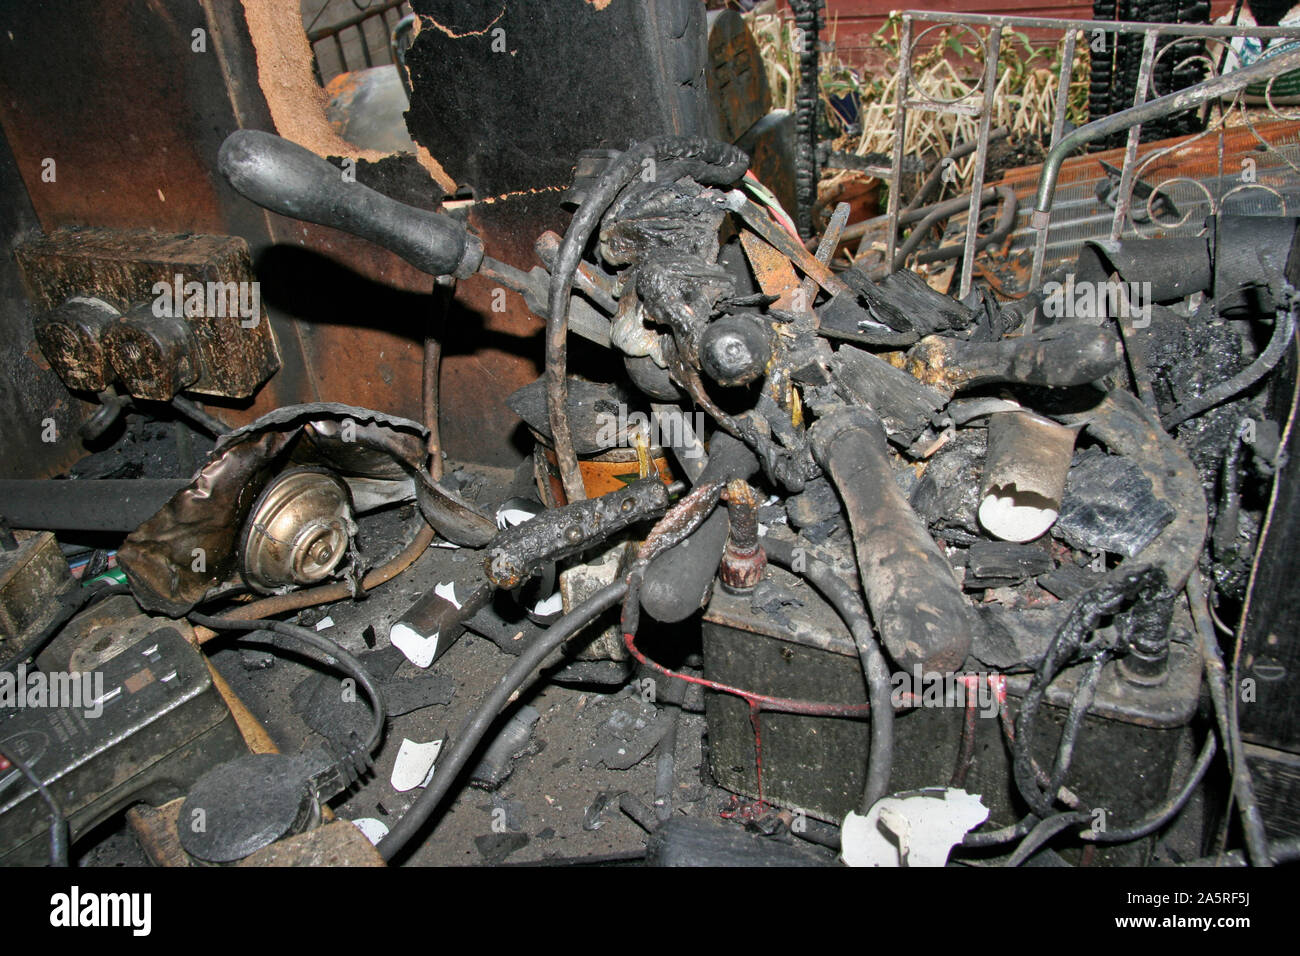 Fire Damaged items from a Garden Shed fire caused by a faulty Refridgerator Stock Photo